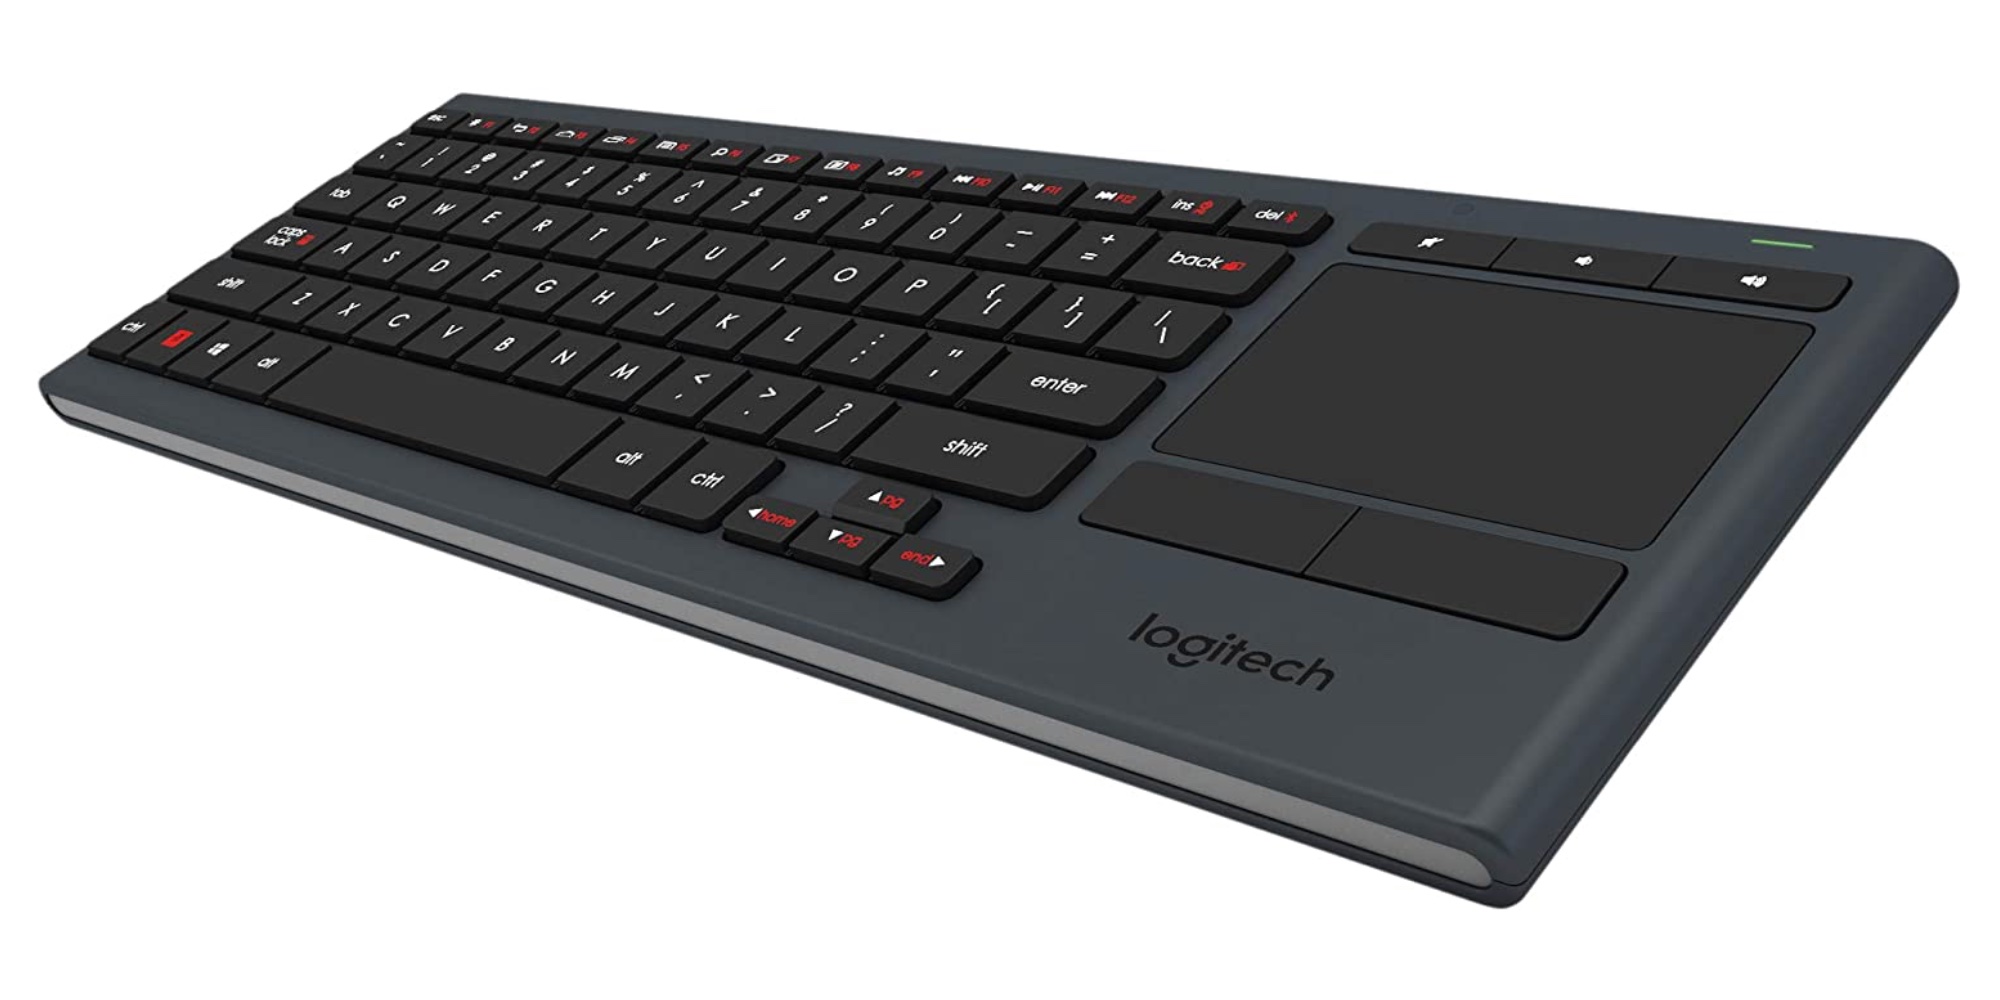 Logitech S Illuminated Keyboard Has A Built In Trackpad At 60 Off More From 18